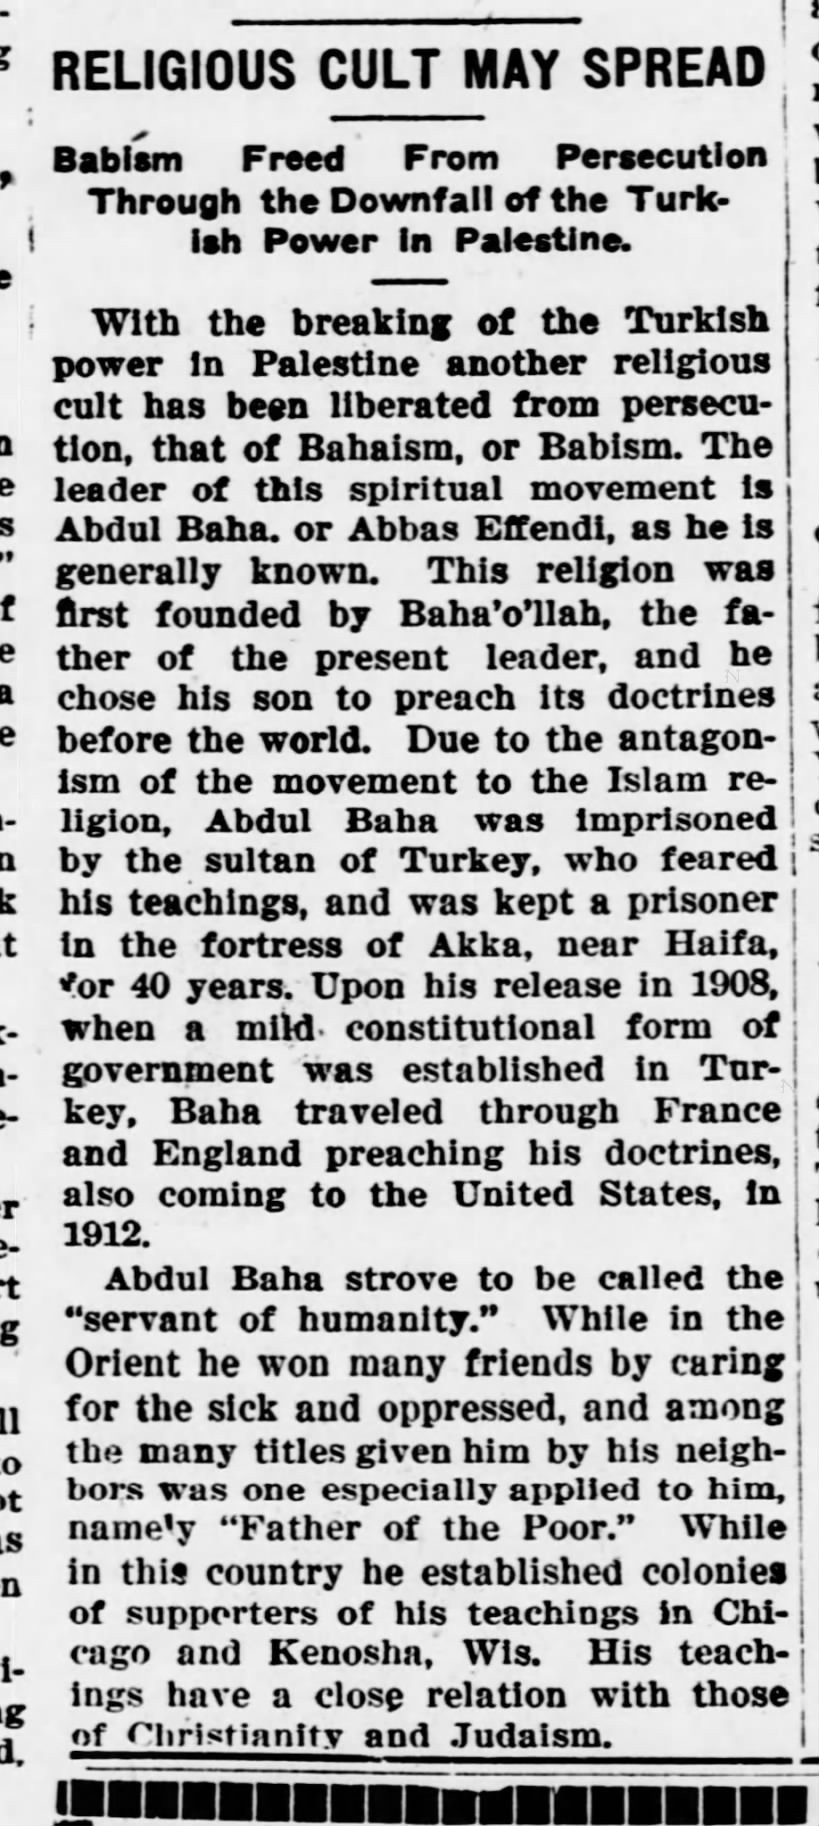 1919 Jan 24 Religious Cult May Spread (echoed elsewhere)